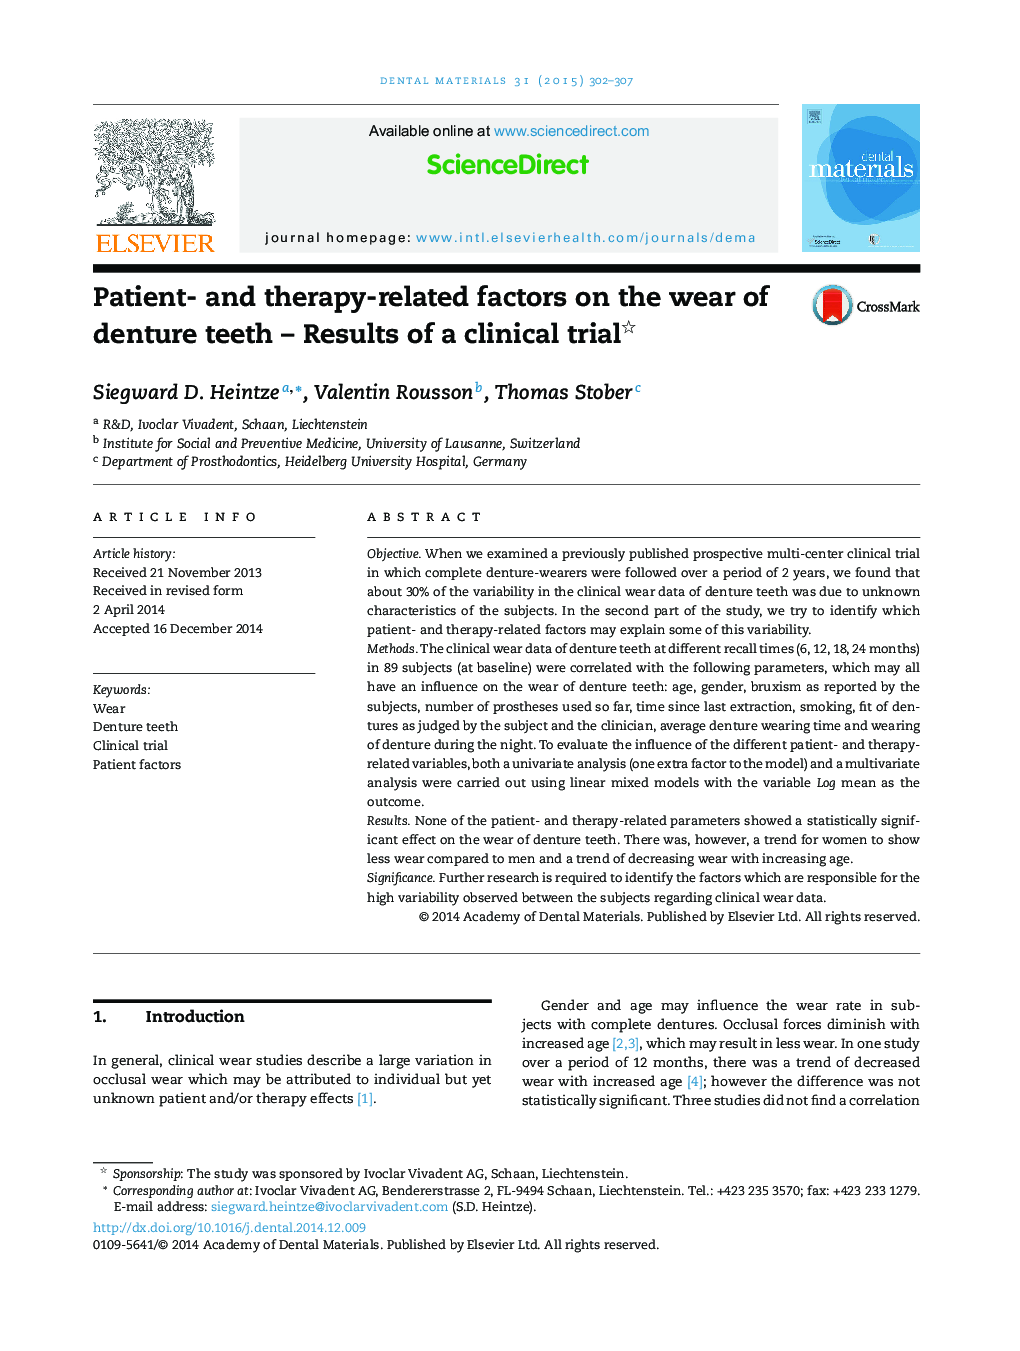 Patient- and therapy-related factors on the wear of denture teeth – Results of a clinical trial 